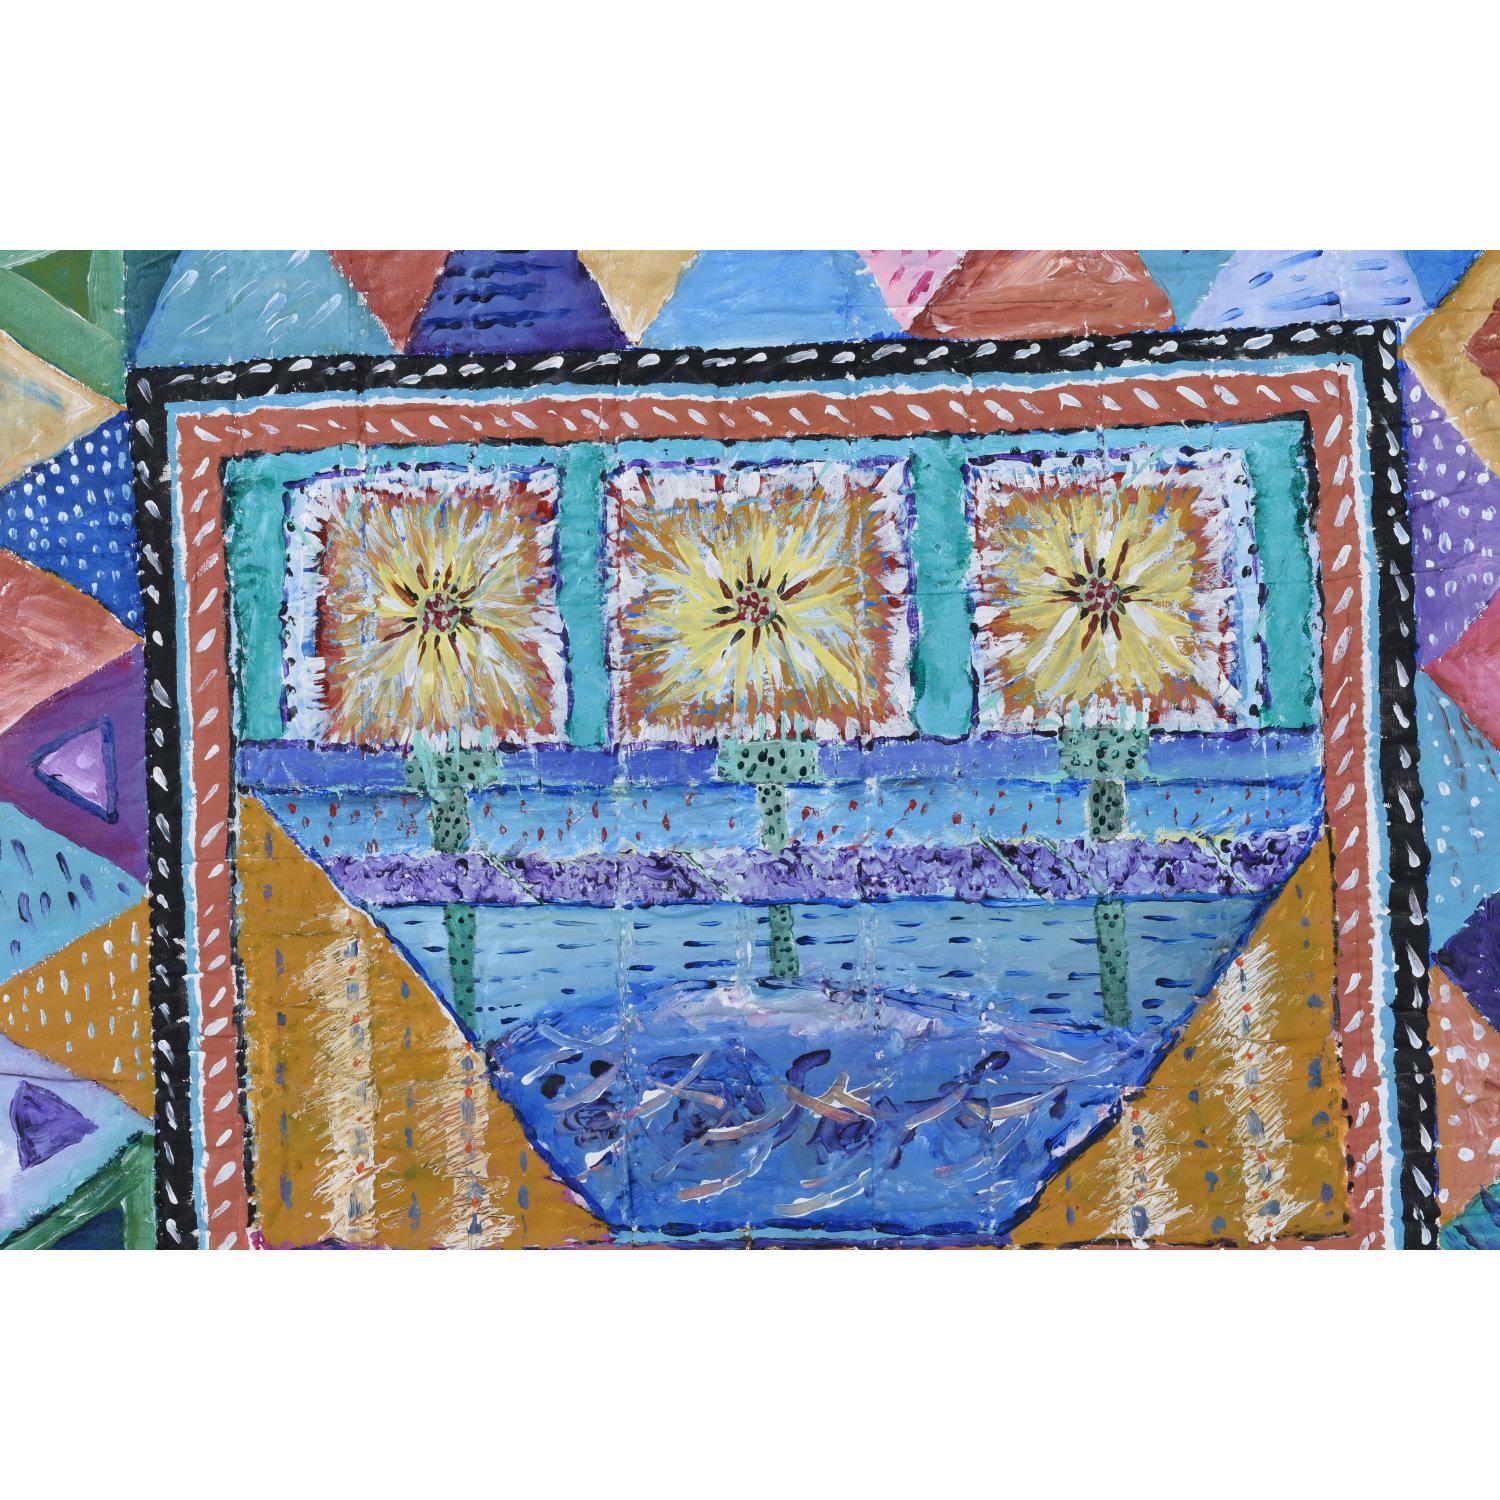 American Contemporary Framed Quilted Textile Art Painting on Canvas For Sale